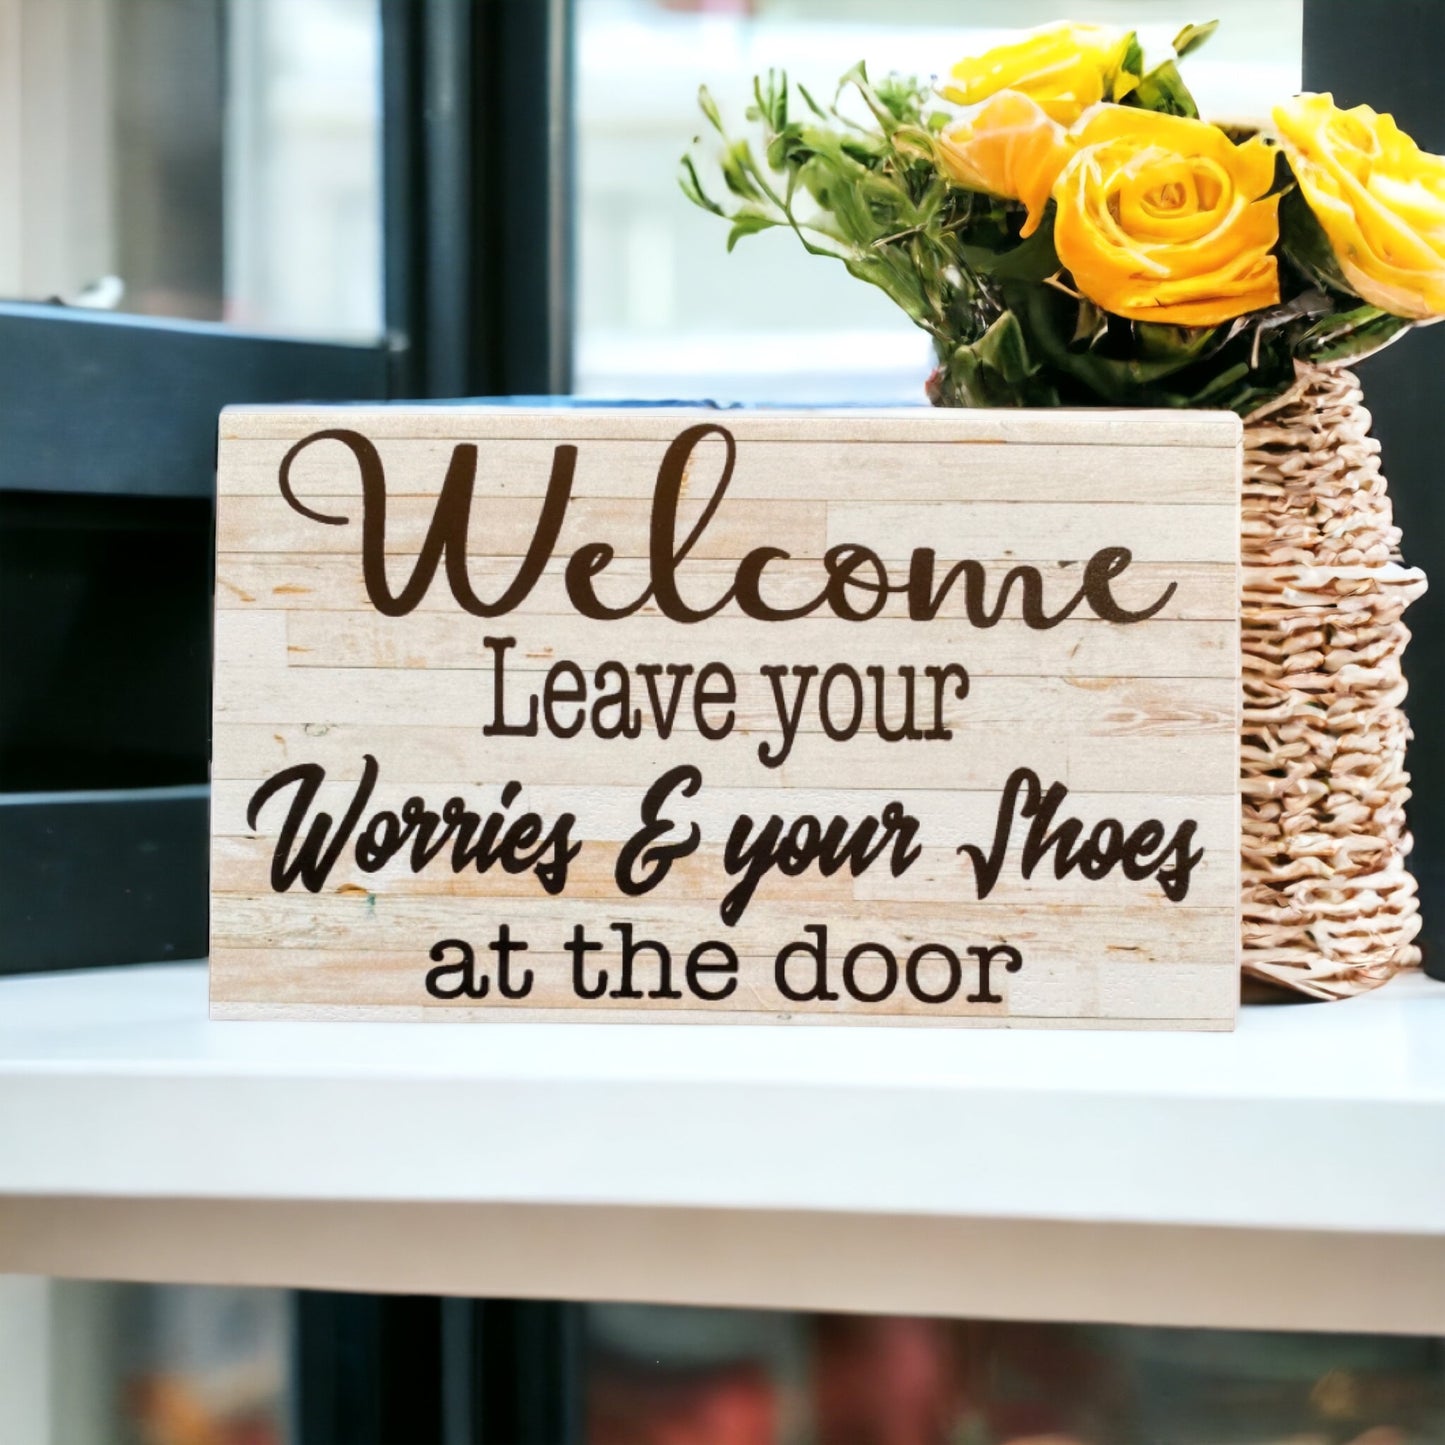 Welcome Leave Your Worries Shoes At The Door French Sign